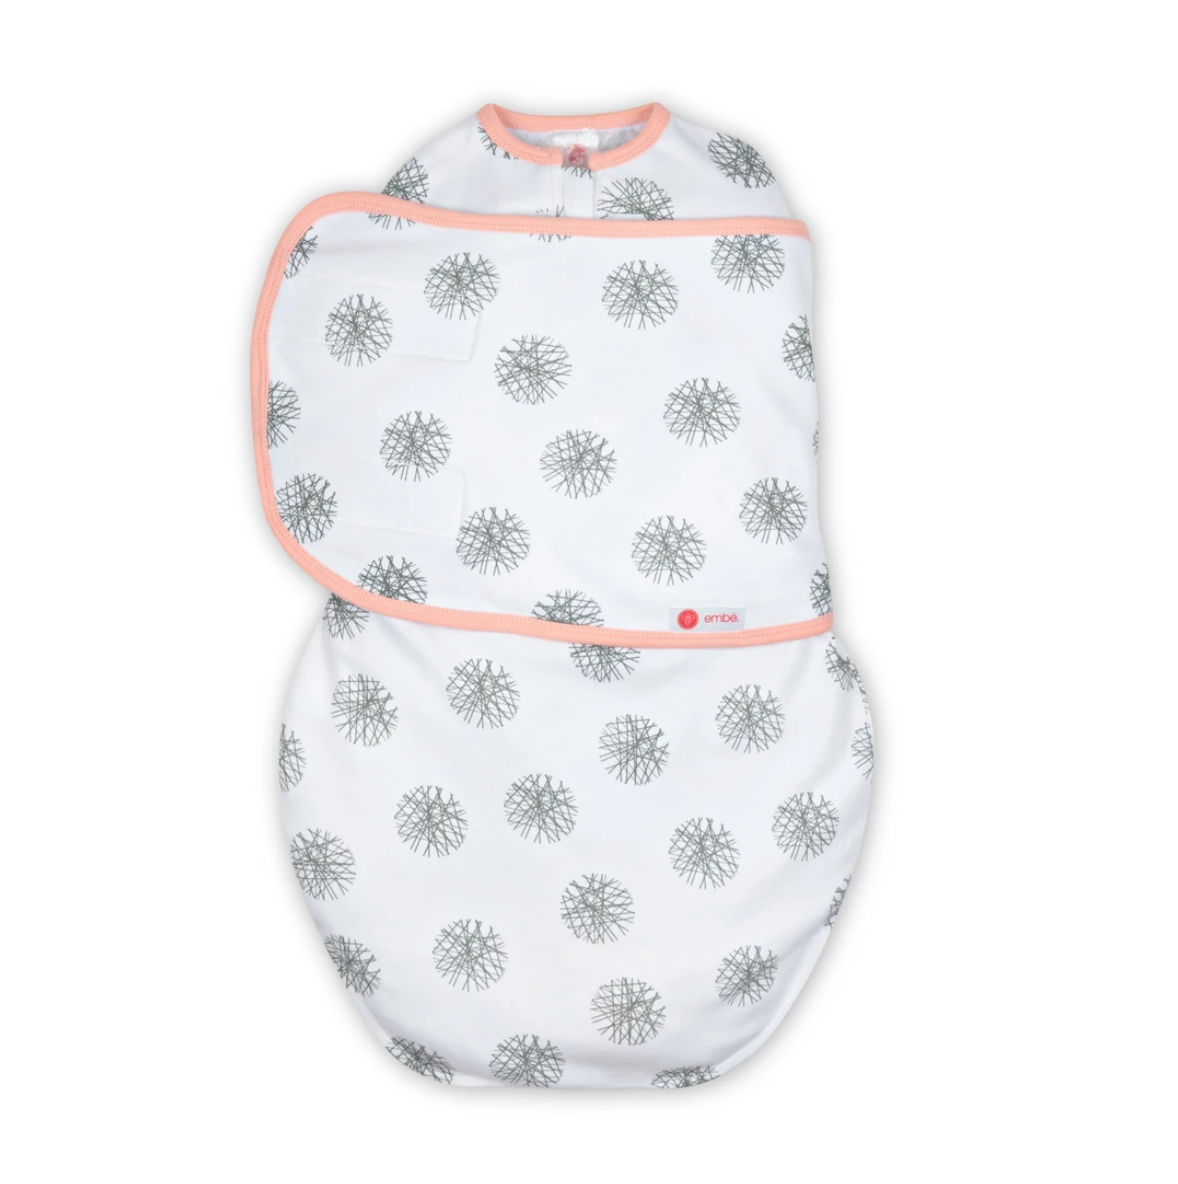 Embe Luxe 2-Way Swaddle (Rose)